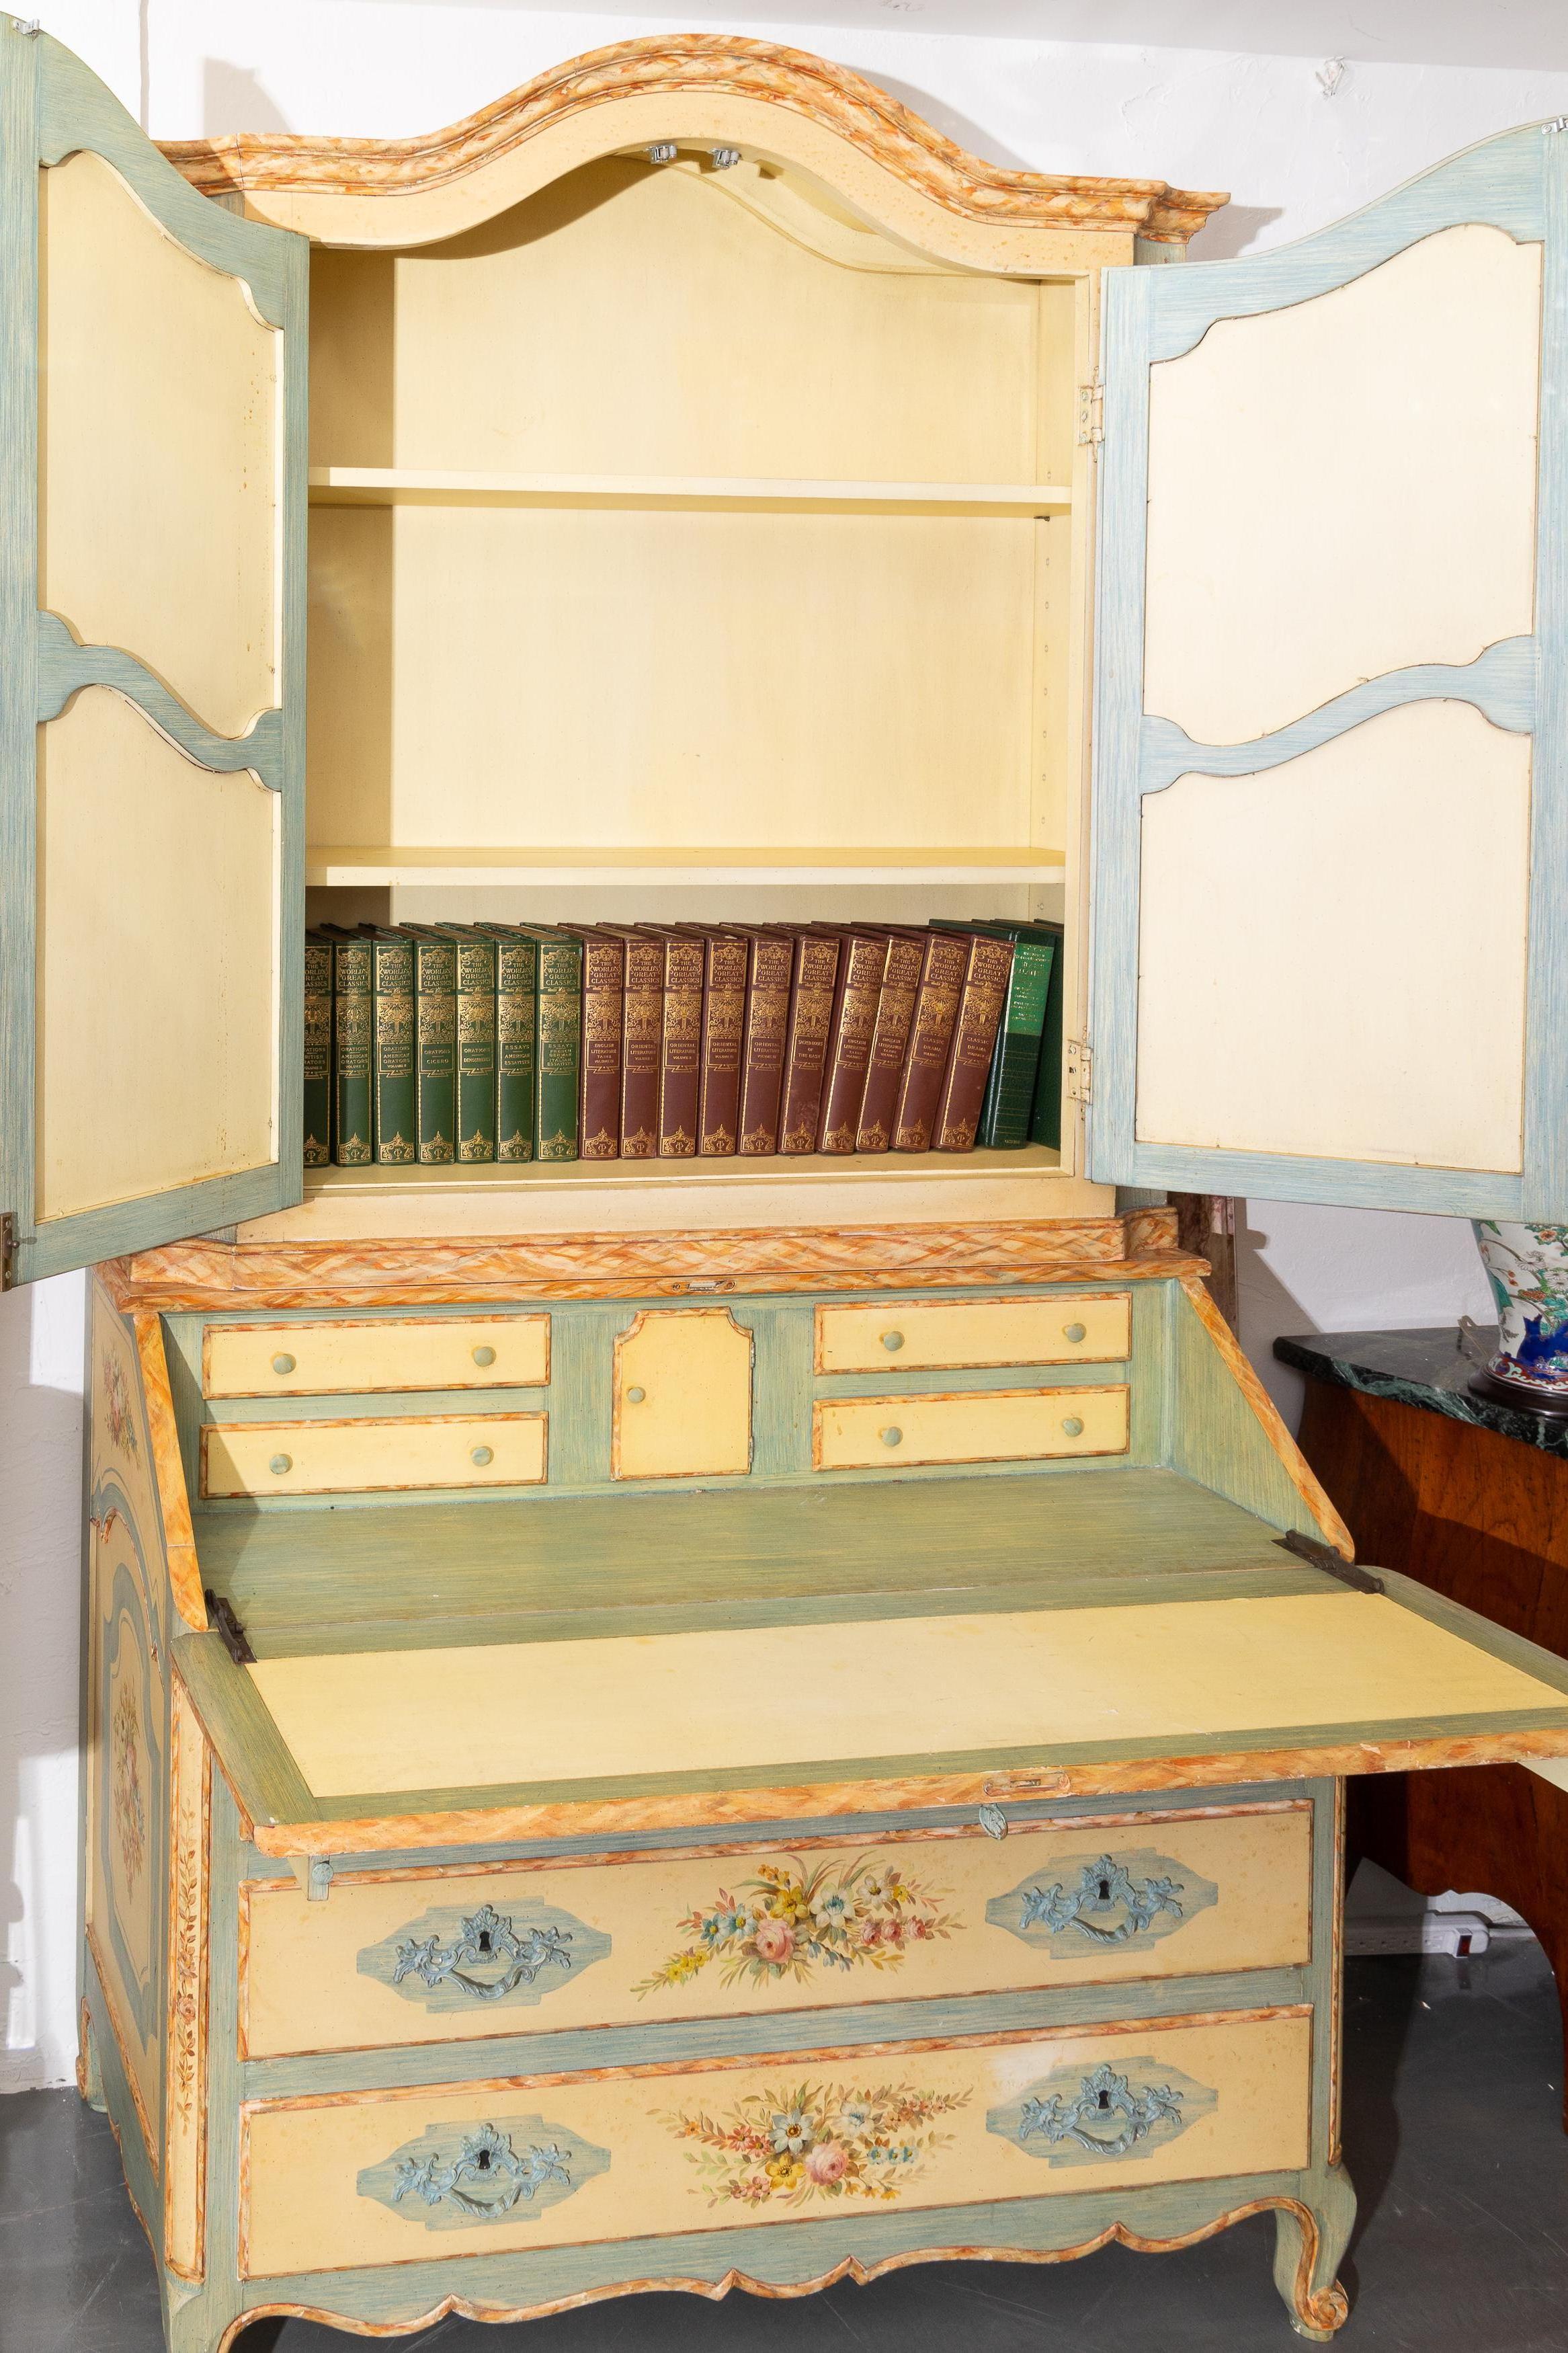 This is a lovely, decorative Italian secretary, painted overall with floral sprays against a pale yellow ground with light blue demarcations. The dome cornice is over two paneled doors. The bottom section has a slant front over three graduated